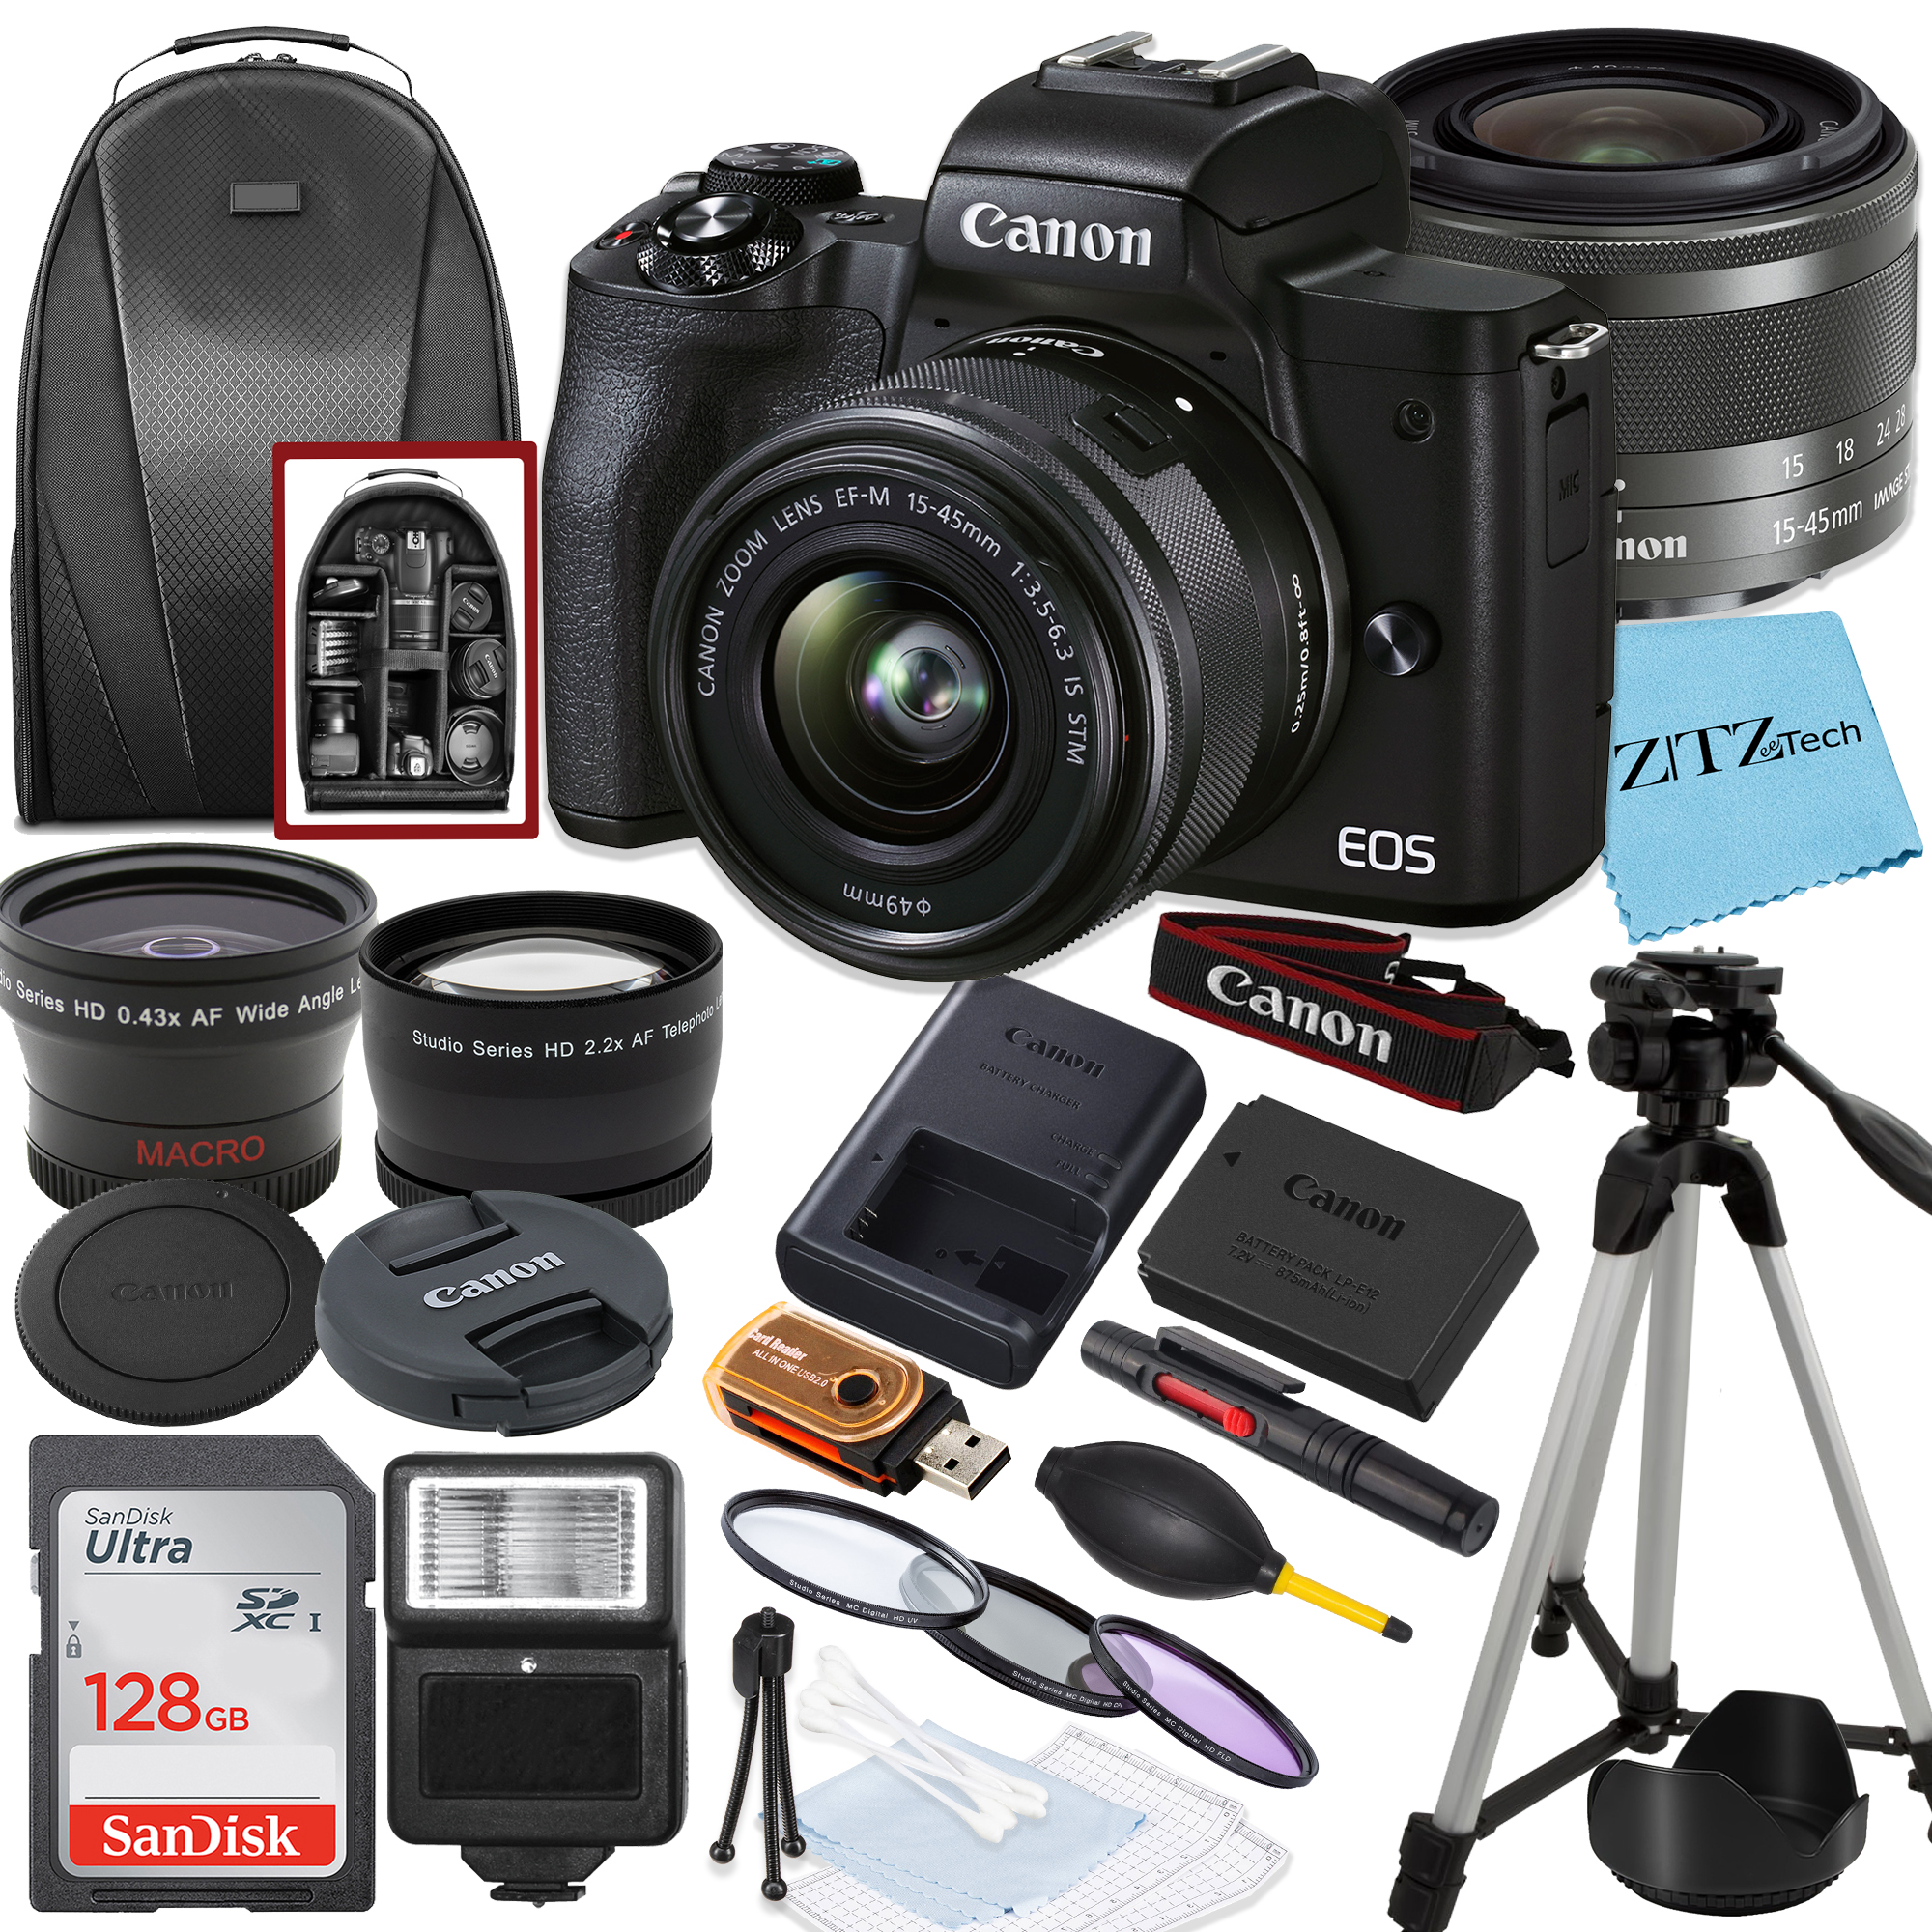 Canon EOS M50 Mark II Mirrorless Camera Bundle with 15-45mm Lens, SanDisk 128GB Memory Card, Tripod, Flash, Backpack and ZeeTech Accessory Bundle